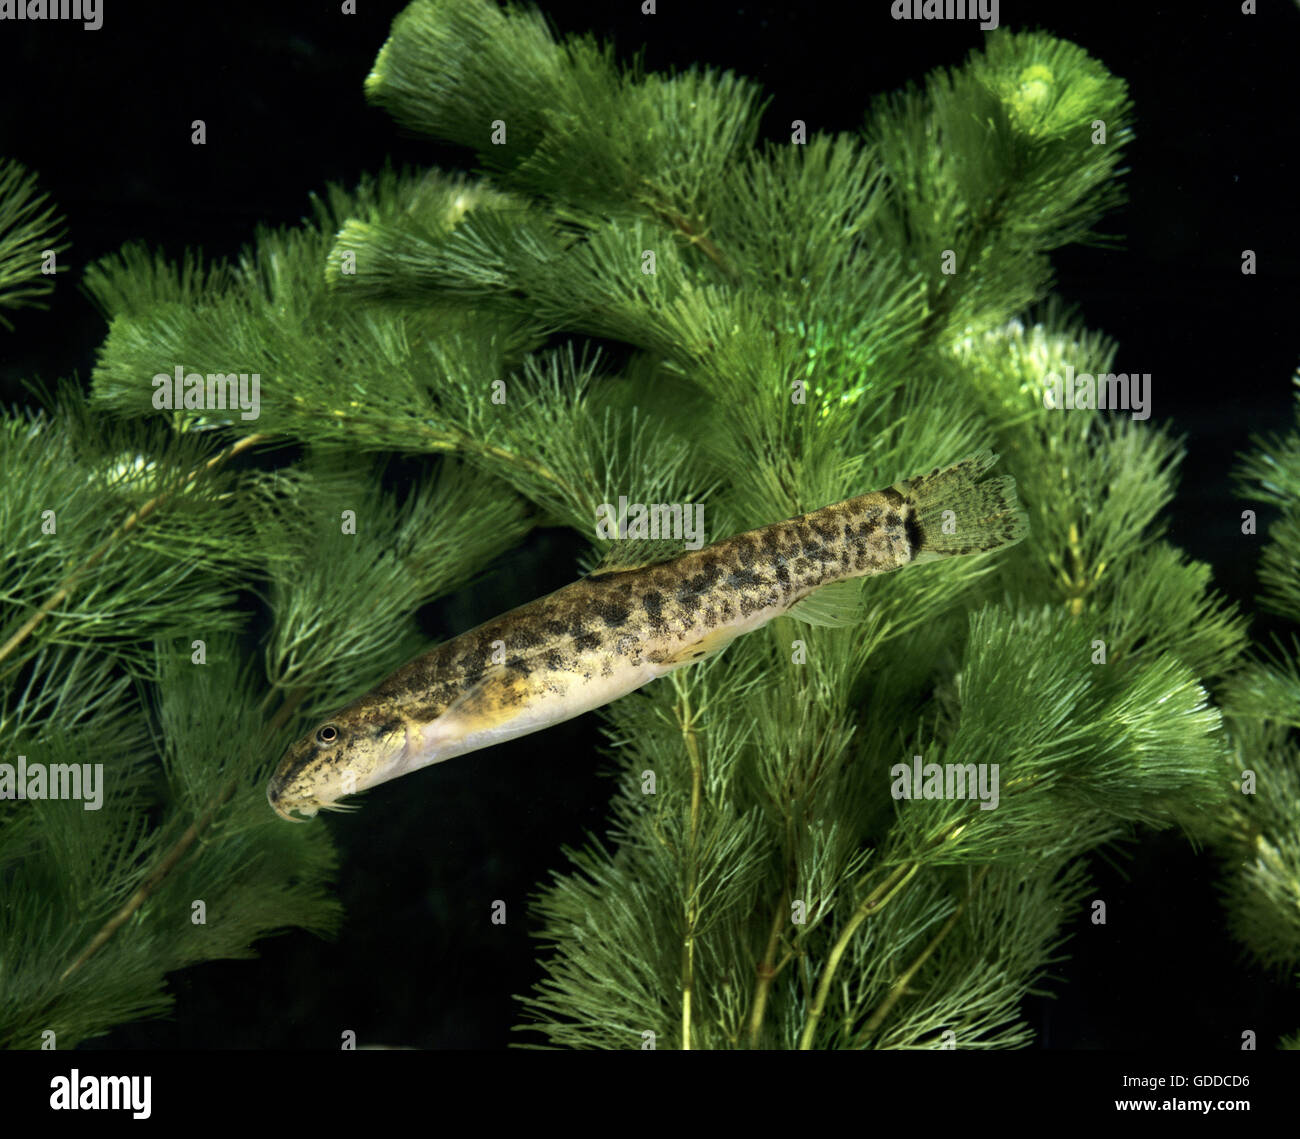 Spined Loach, cobitis taenia Stock Photo